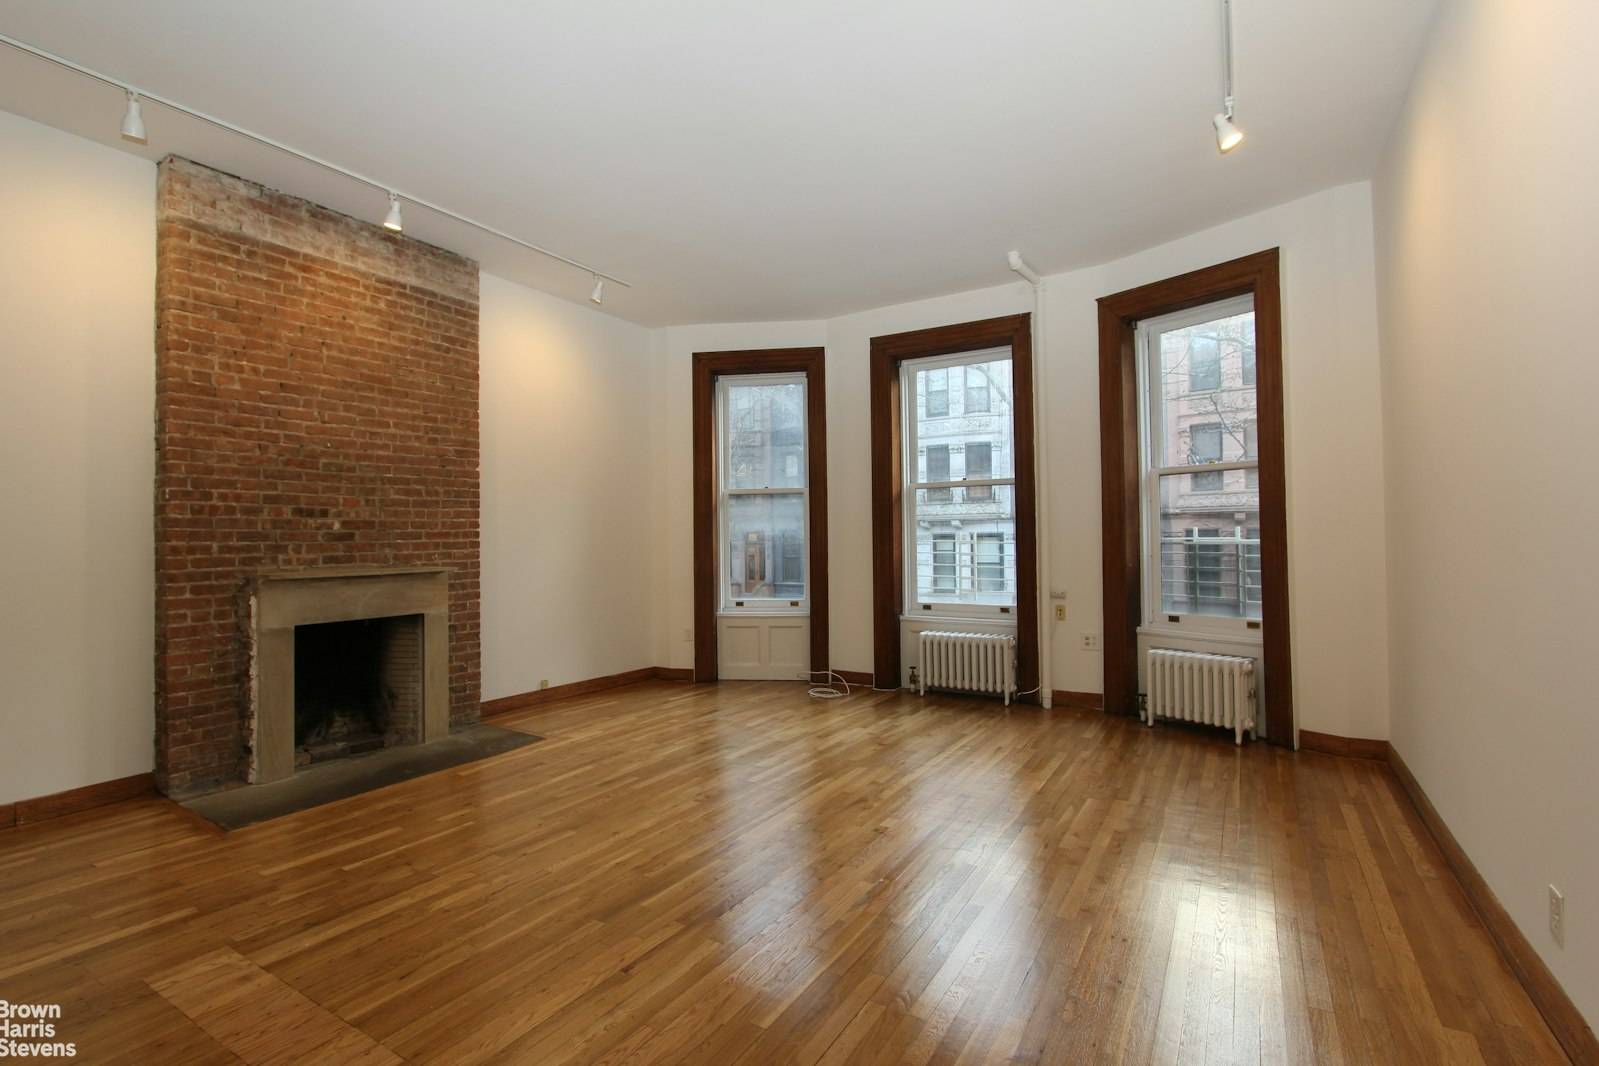 Welcome to this duplex apartment which occupies the entire parlor floor with its 12 ft.